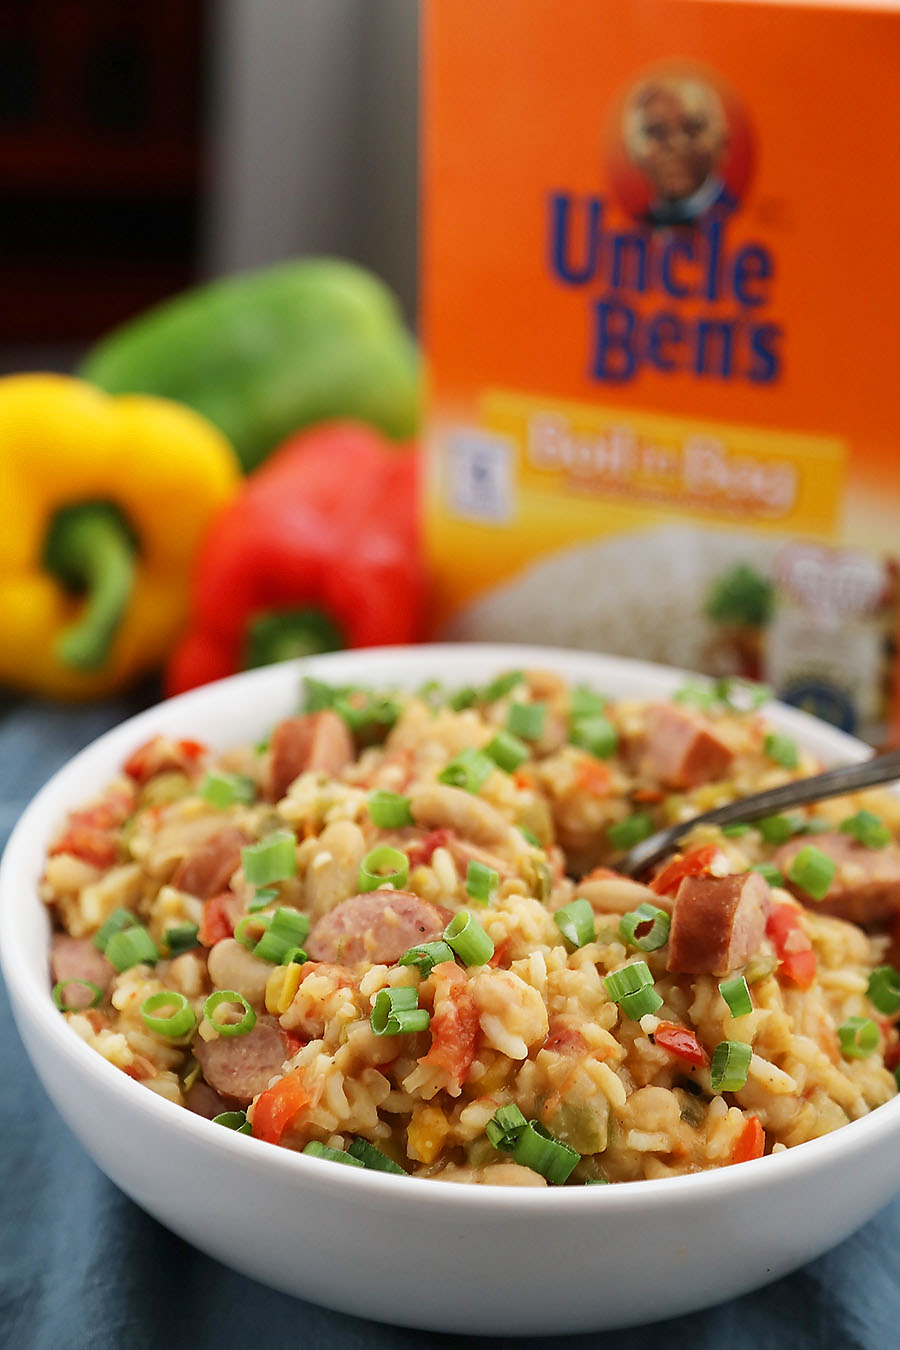 Cajun Sausage, White Bean and Rice Stew - A comforting meal easily cooked on your stovetop! Try this simple spiced Cajun stew with @UncleBensRice, sausage, white beans, tomatoes and bell peppers. thecomfortofcooking.com